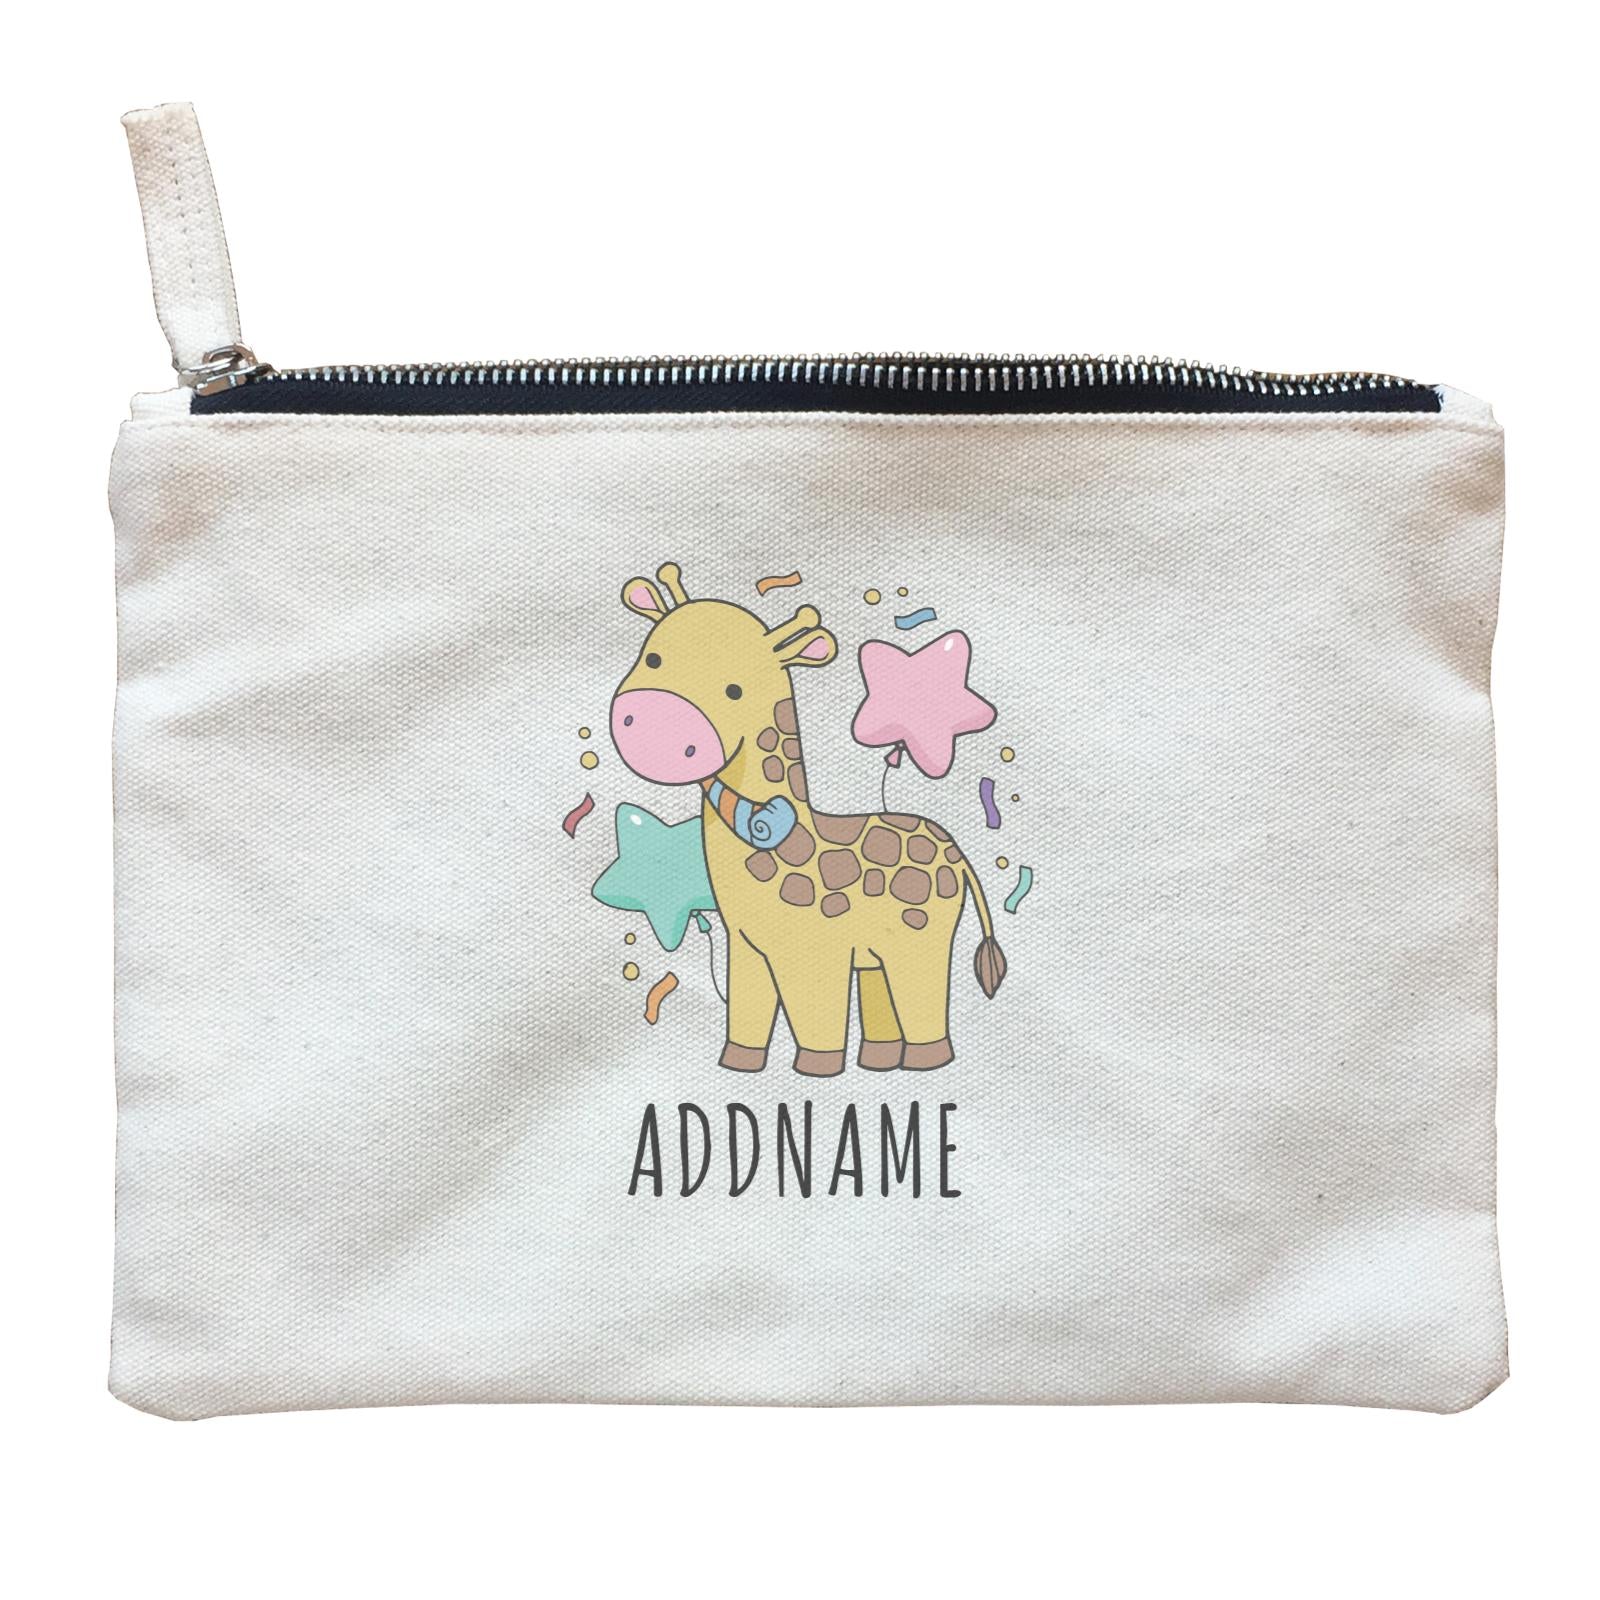 Birthday Sketch Animals Giraffe with Party Horn Addname Zipper Pouch